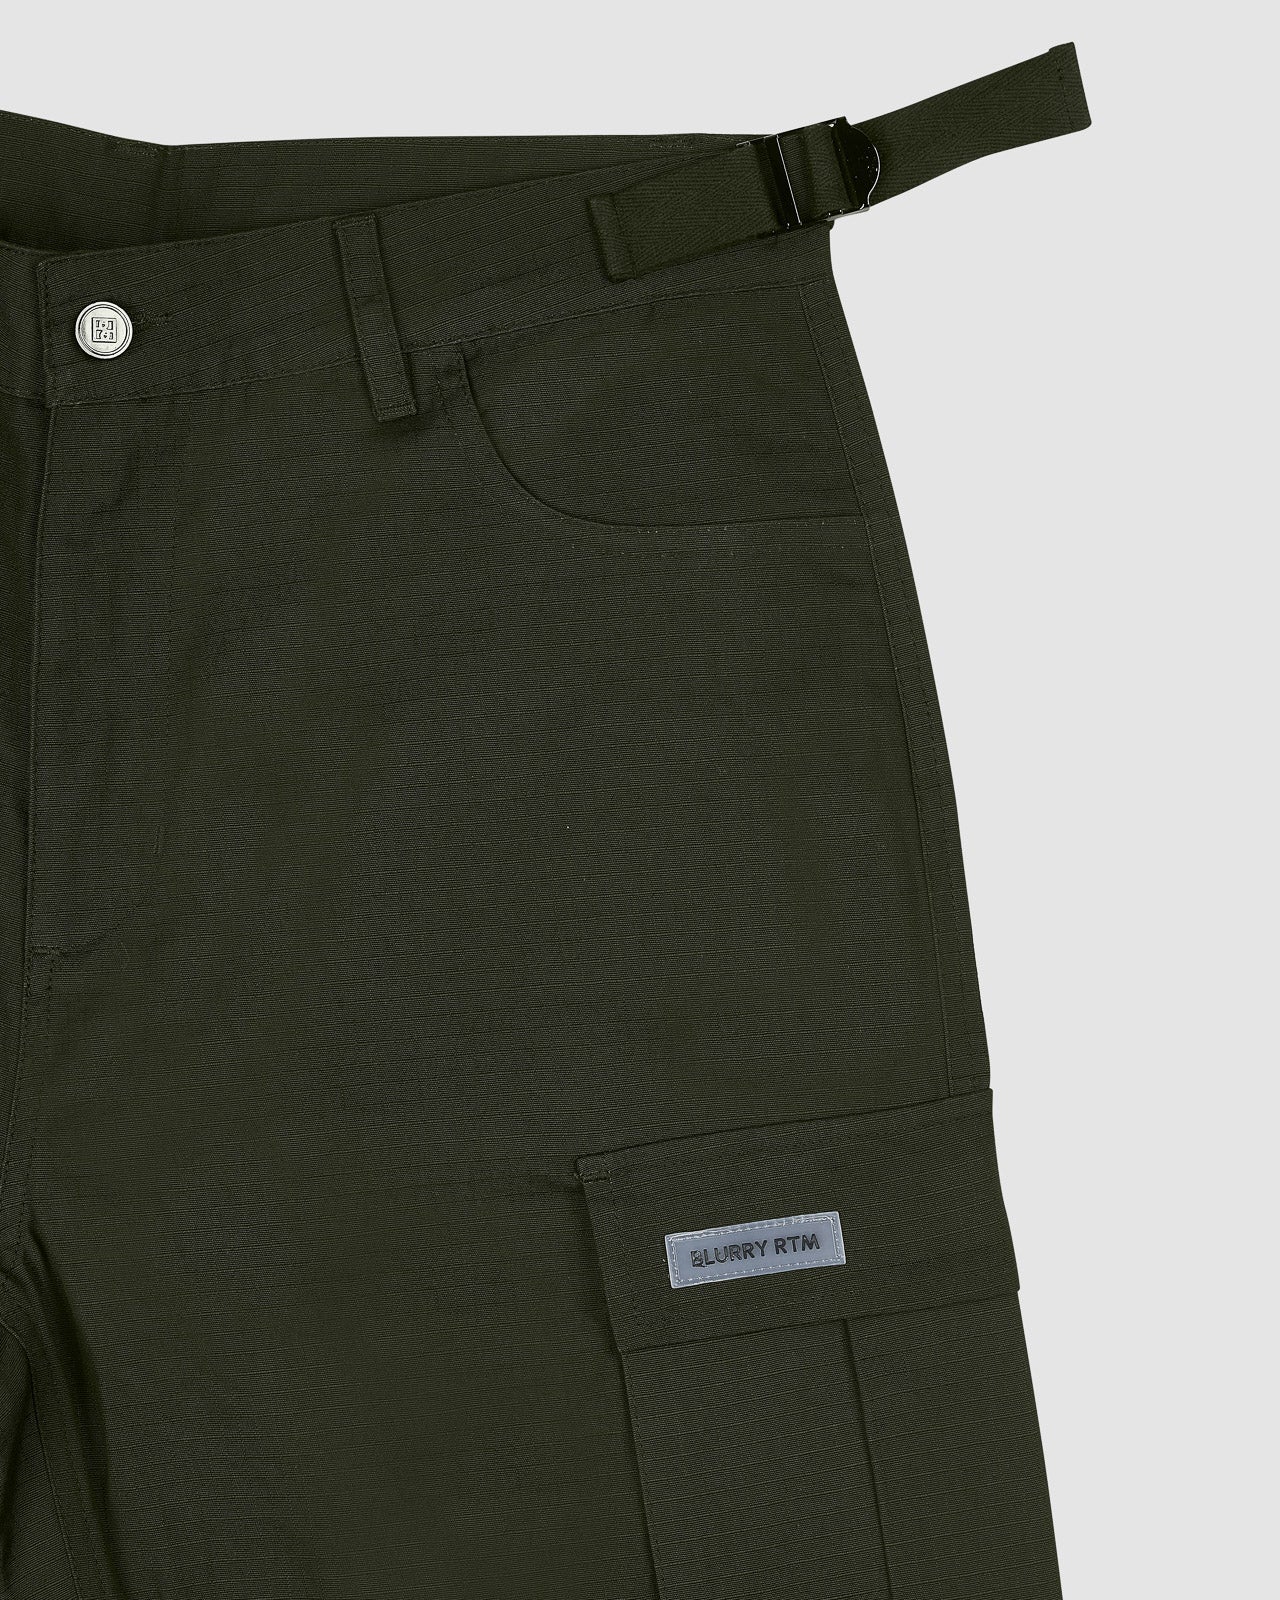 BLURRY RTM Cargo Pants (Army Green)